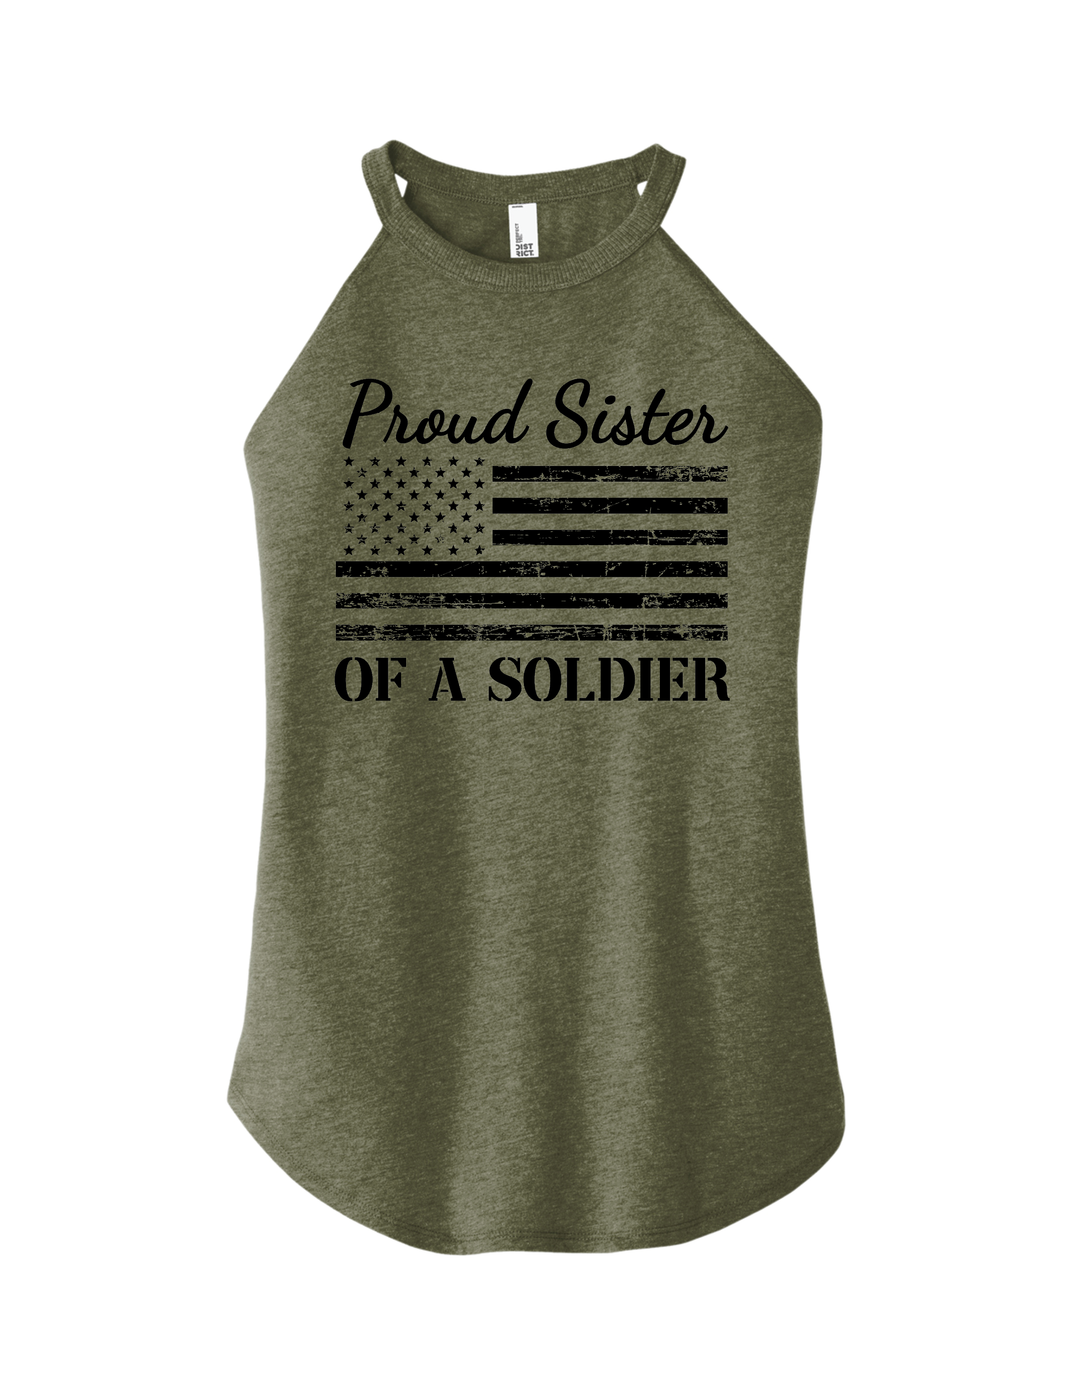 Proud Sister of a Soldier Tank (Green)